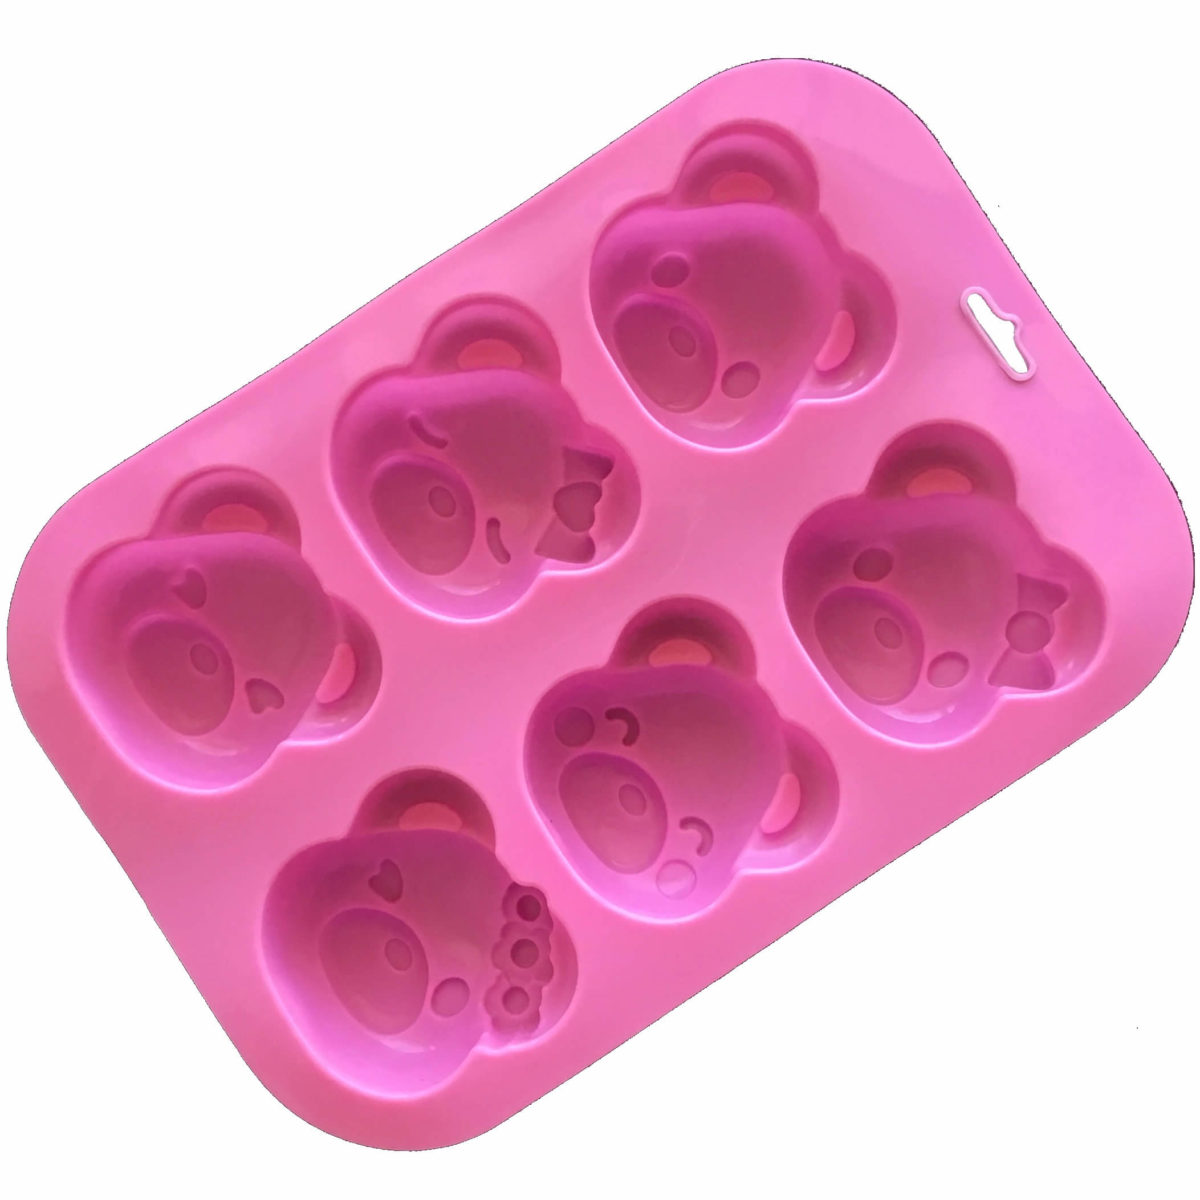 back of pink six cavity silicone mould with teddy bear head-shaped cavities each with an individual facial expression